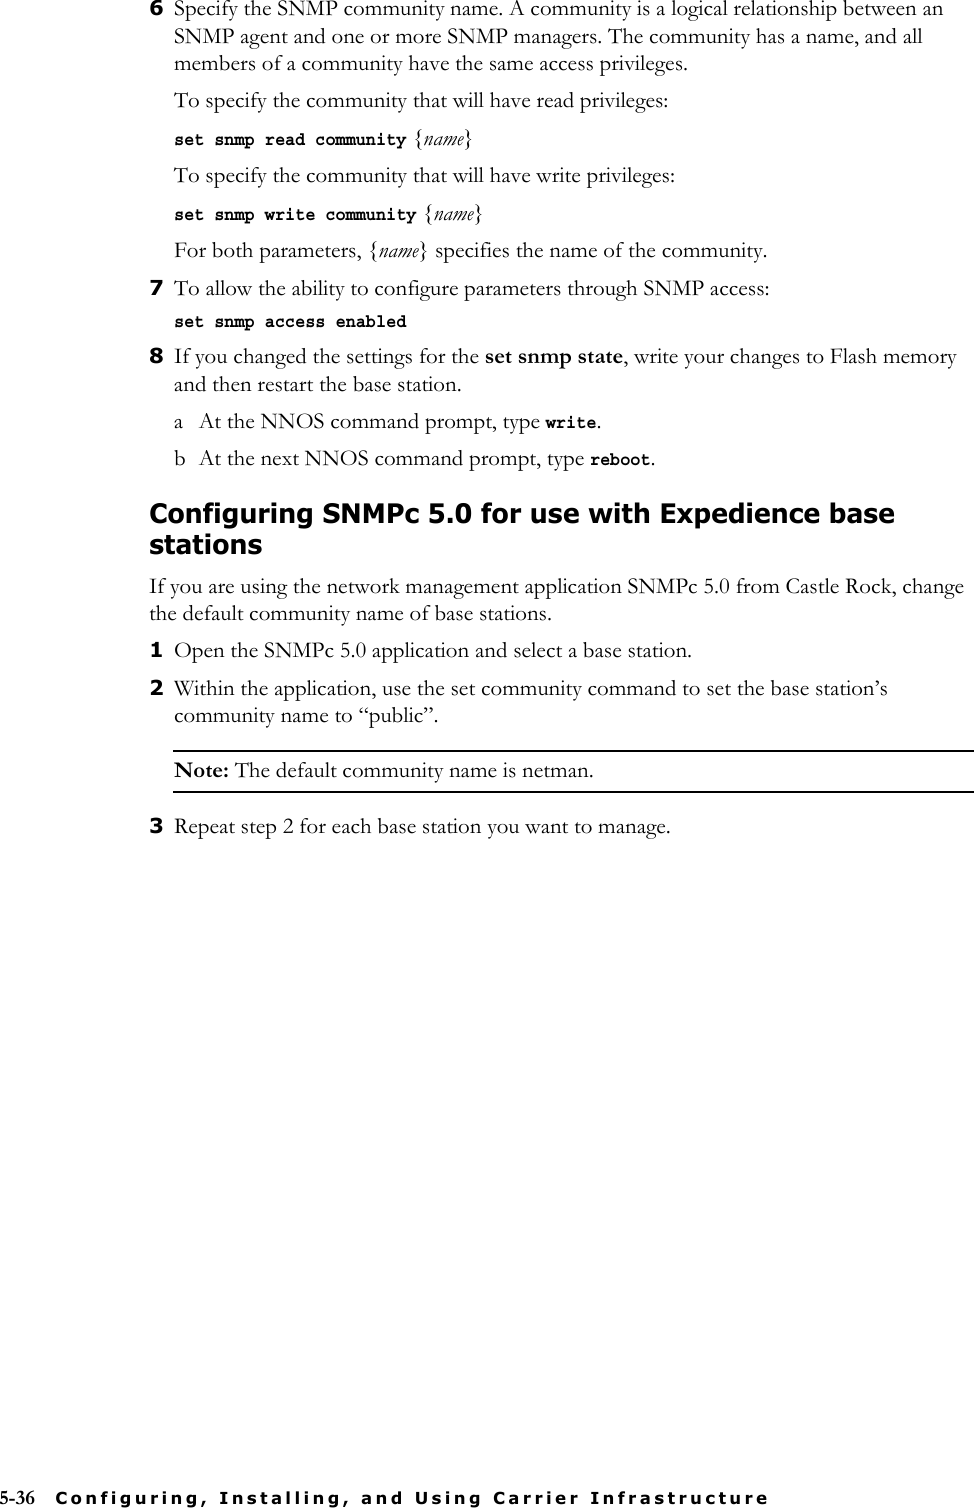 5-36 Configuring, Installing, and Using Carrier Infrastructure6Specify the SNMP community name. A community is a logical relationship between an SNMP agent and one or more SNMP managers. The community has a name, and all members of a community have the same access privileges. To specify the community that will have read privileges:set snmp read community {name}To specify the community that will have write privileges:set snmp write community {name}For both parameters, {name} specifies the name of the community.7To allow the ability to configure parameters through SNMP access:set snmp access enabled8If you changed the settings for the set snmp state, write your changes to Flash memory and then restart the base station. a At the NNOS command prompt, type write.b At the next NNOS command prompt, type reboot.Configuring SNMPc 5.0 for use with Expedience base stationsIf you are using the network management application SNMPc 5.0 from Castle Rock, change the default community name of base stations. 1Open the SNMPc 5.0 application and select a base station. 2Within the application, use the set community command to set the base station’s community name to “public”.Note: The default community name is netman.3Repeat step 2 for each base station you want to manage. 